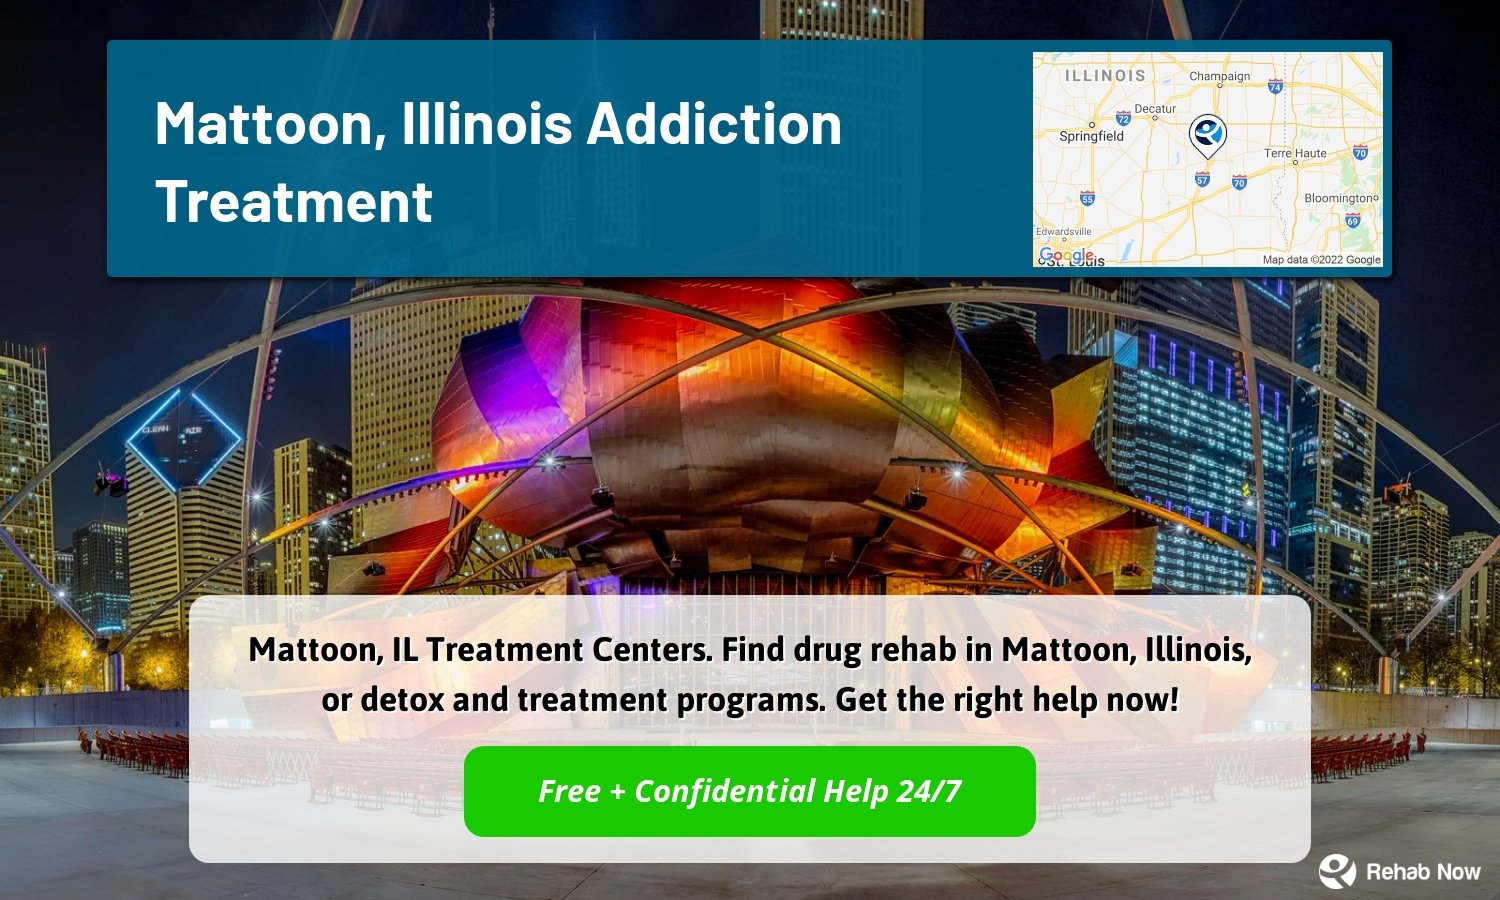 Mattoon, IL Treatment Centers. Find drug rehab in Mattoon, Illinois, or detox and treatment programs. Get the right help now!